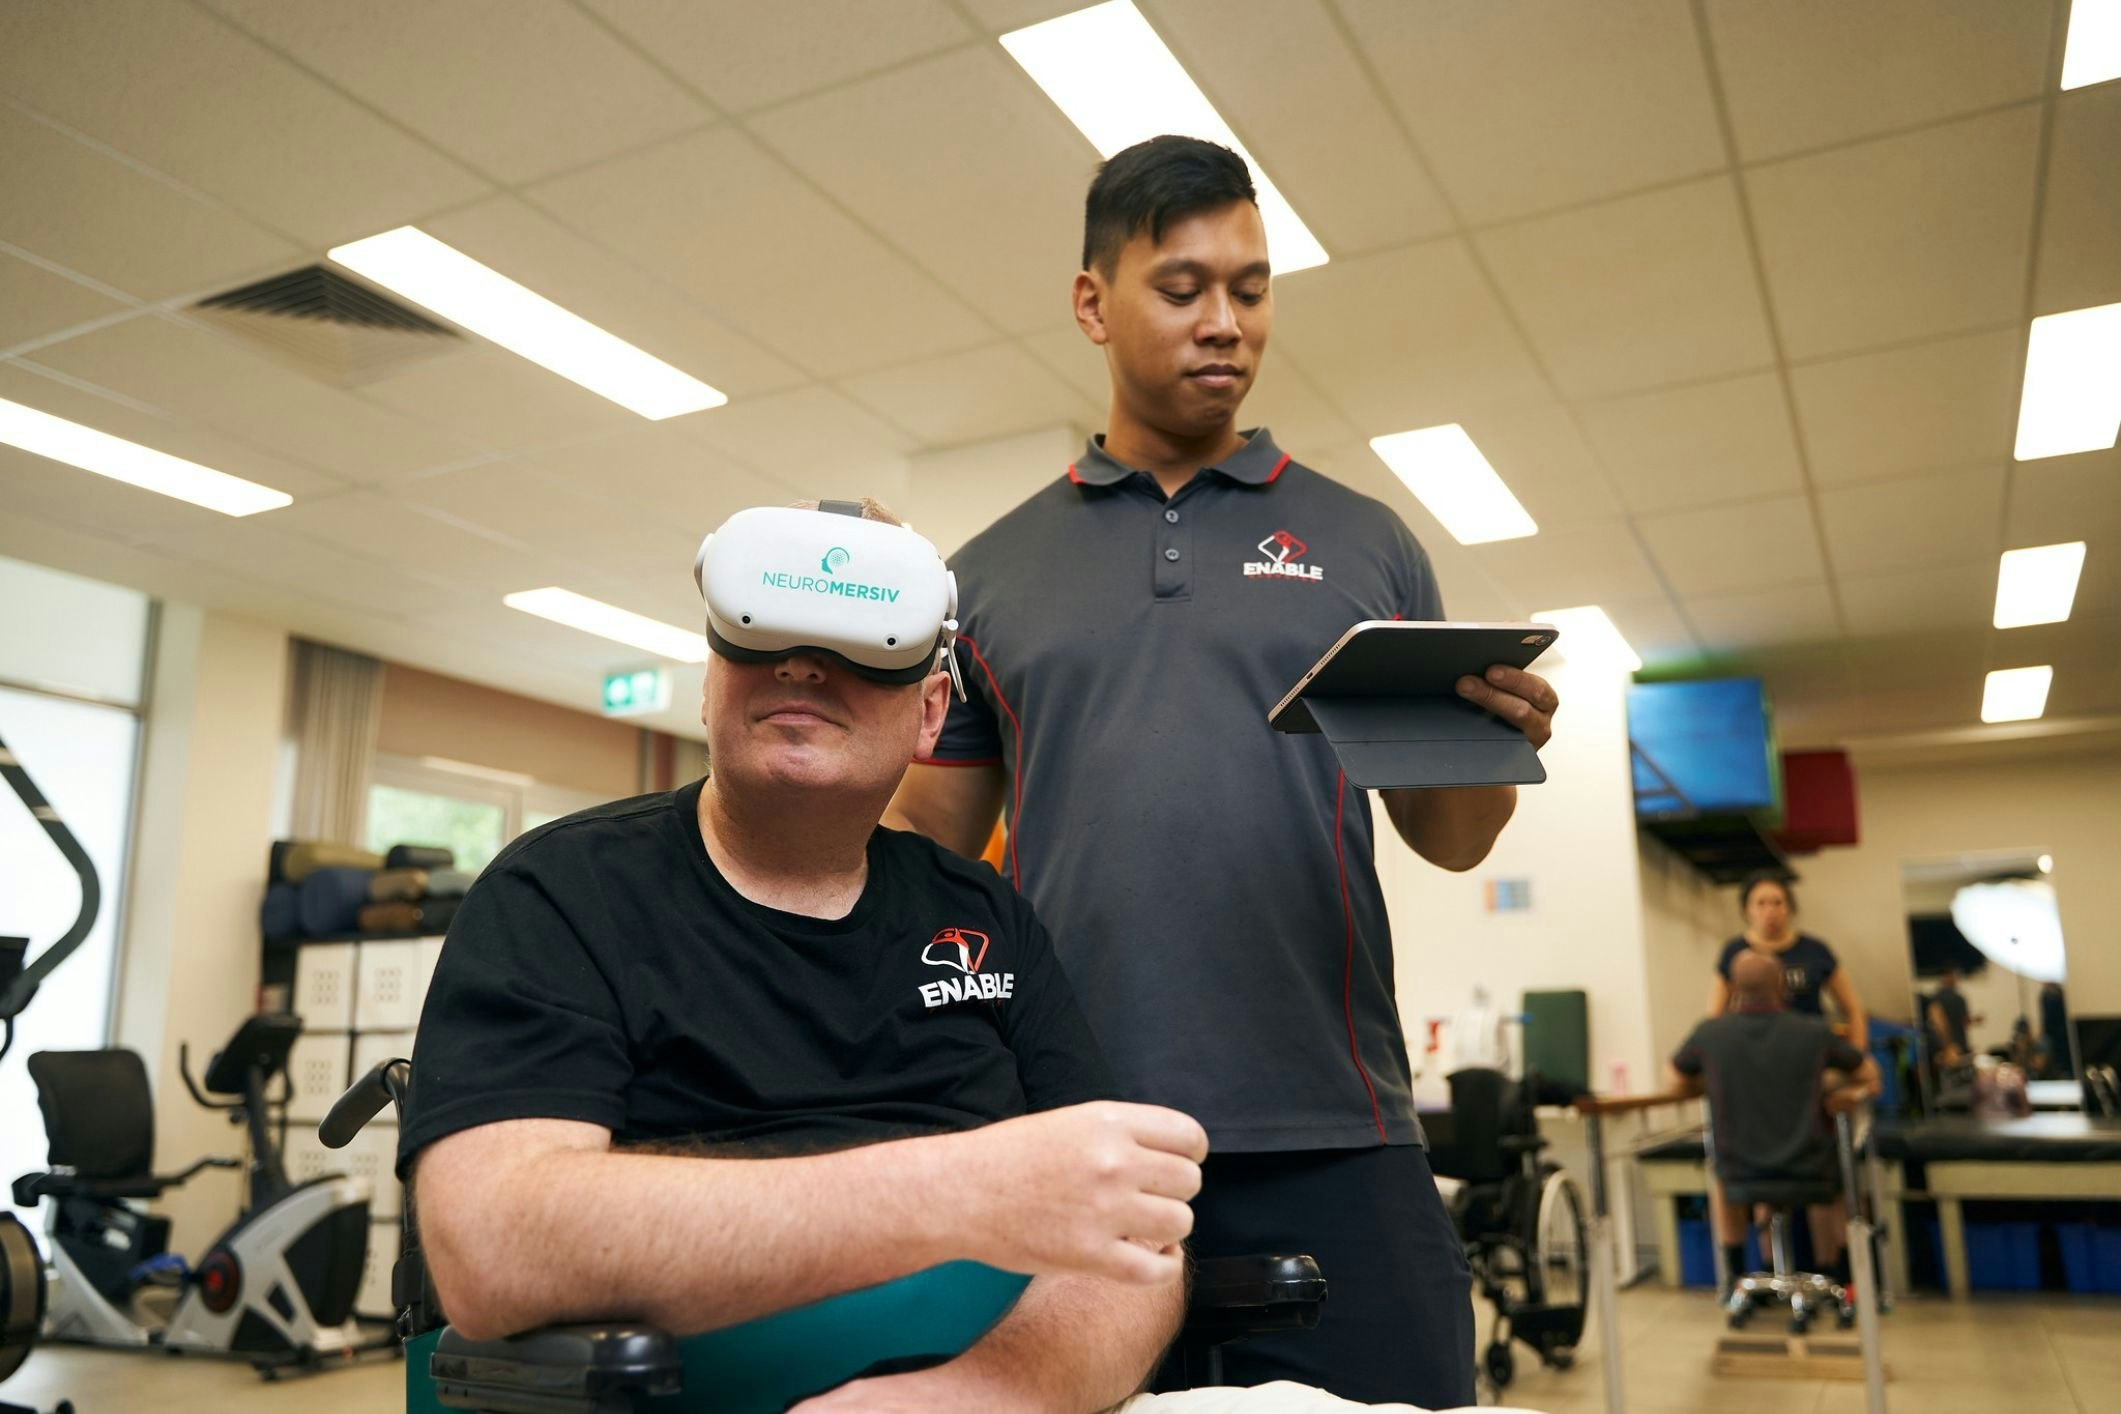 <p>Following a stroke or brain injury, people often find that they have acquired an upper-limb motor impairment as a result, but Neuromersiv are looking to provide support on the path to progress. (Image via Neuromersiv)</p>
